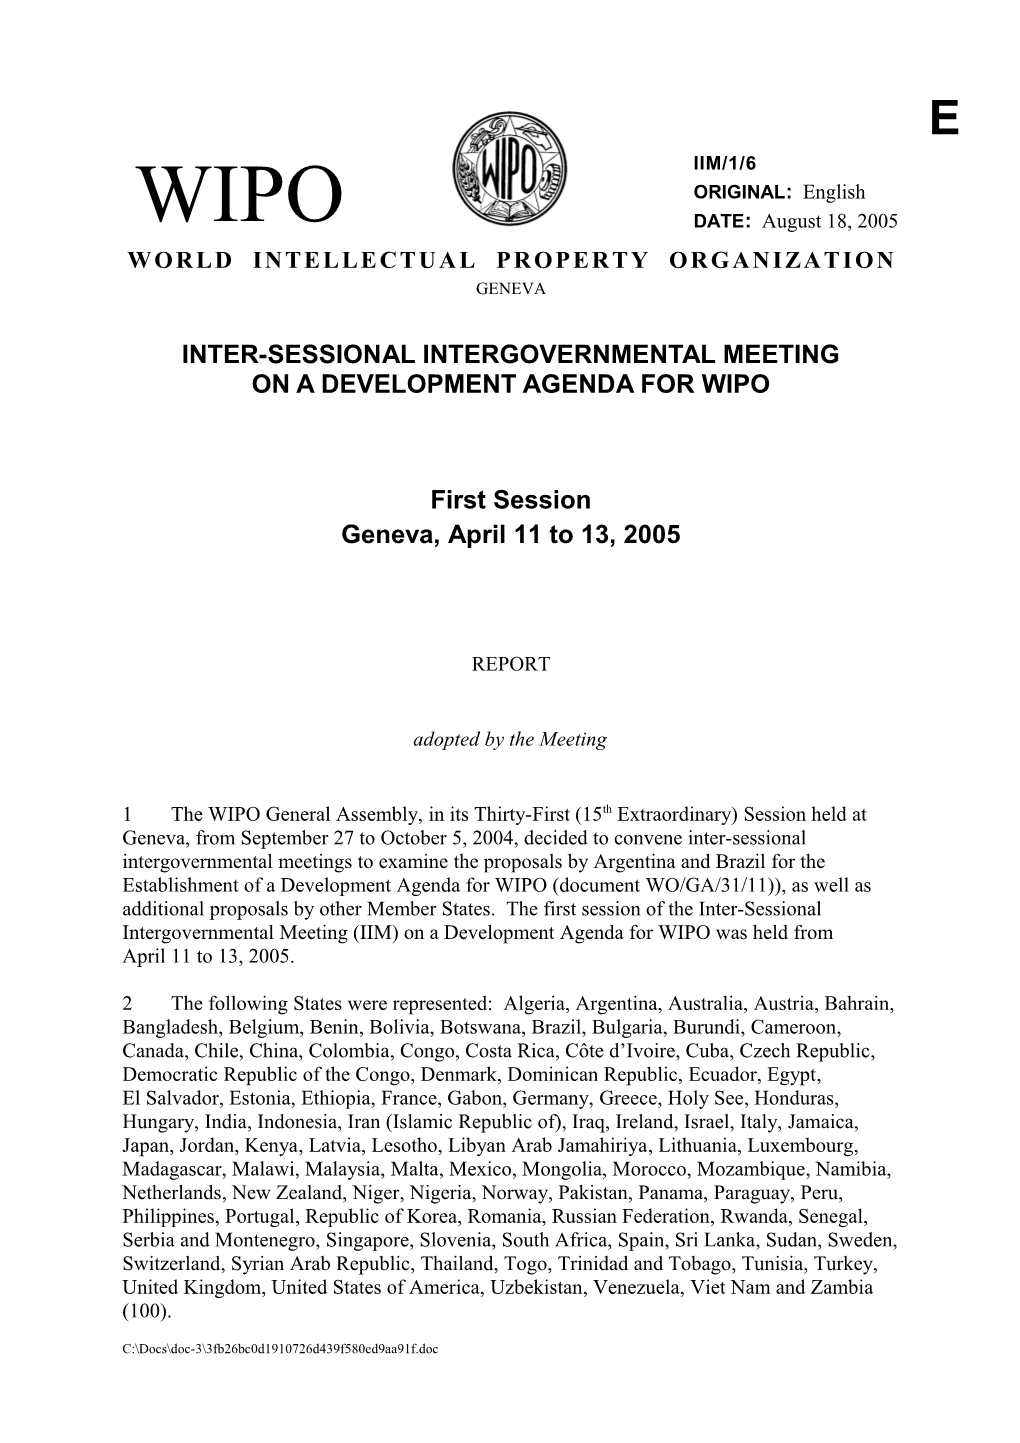 Inter-Sessional Intergovernmental Meeting on a Development Agenda for WIPO